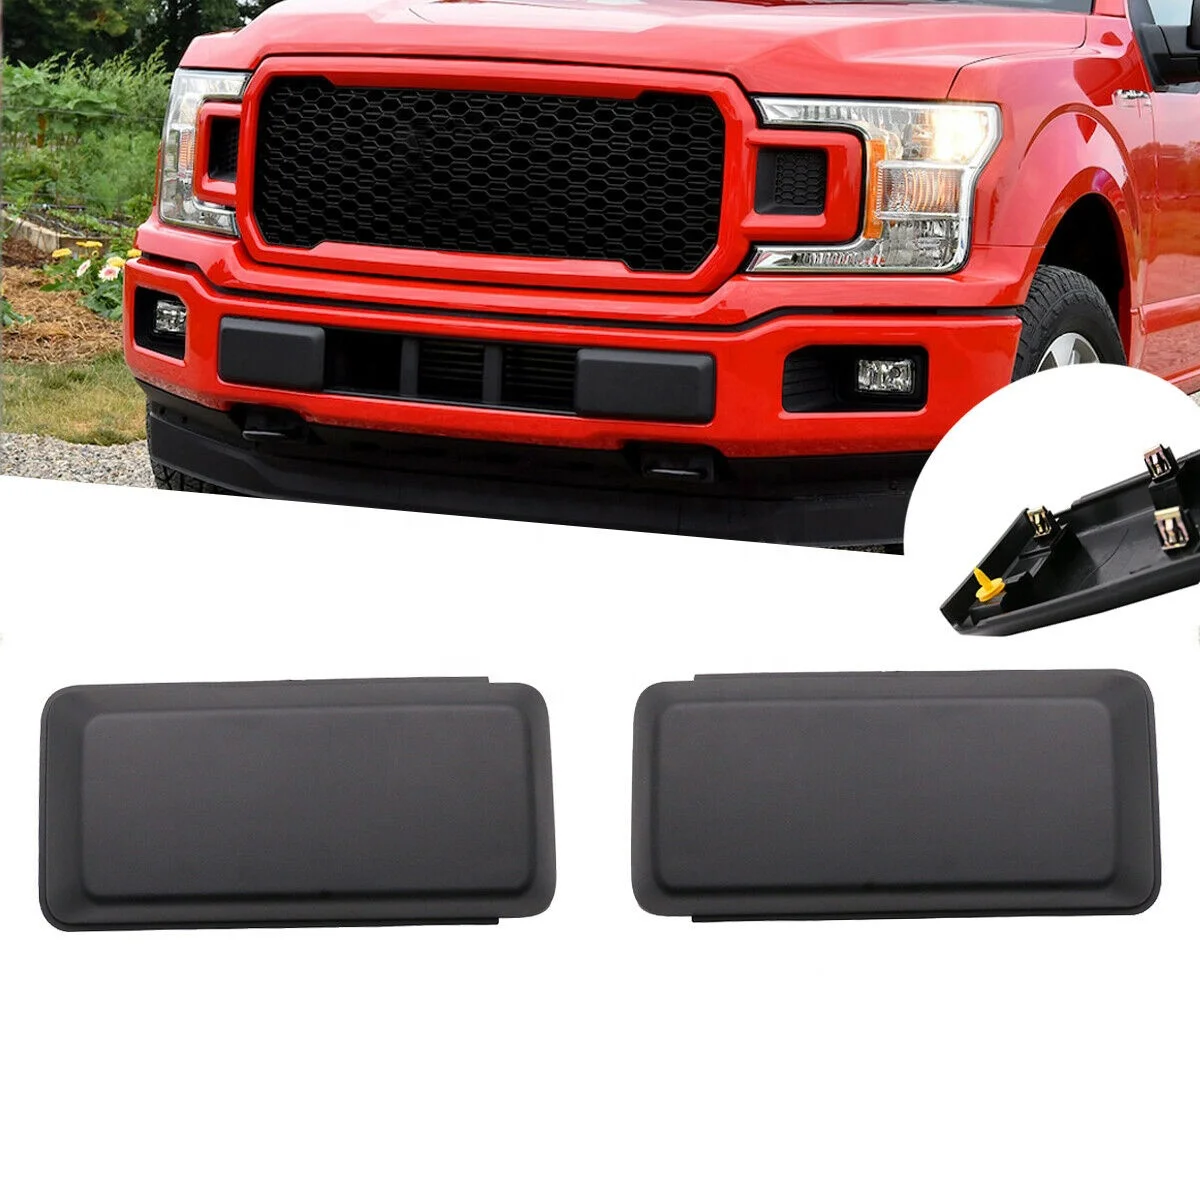 Decter Car Left Side Front Bumper Guards Inserts Cover Pads Caps Replacement for F150 2018 2019 2020 JL3Z 17E811 AB